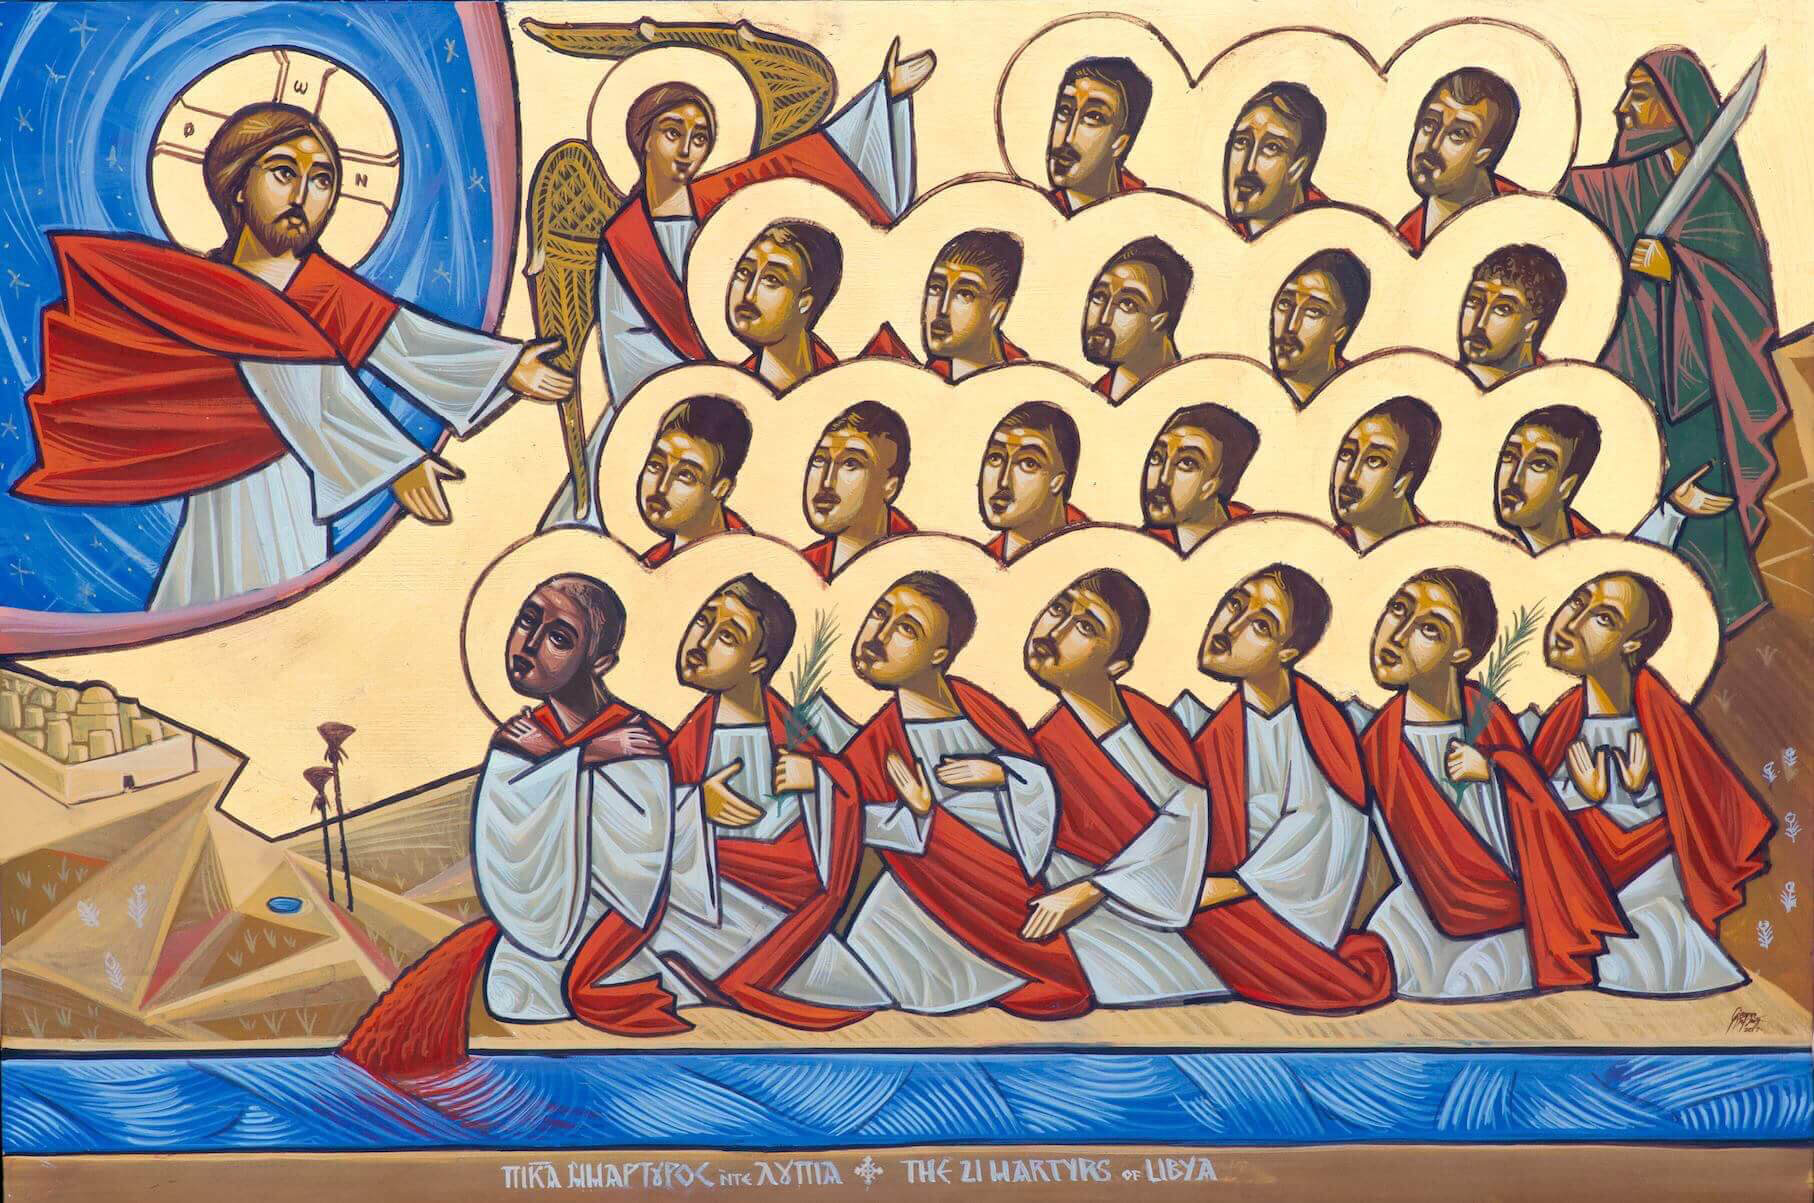 Relics of the 21 Coptic martyrs executed by Daesh in Libya in 2015 are back to Egypt